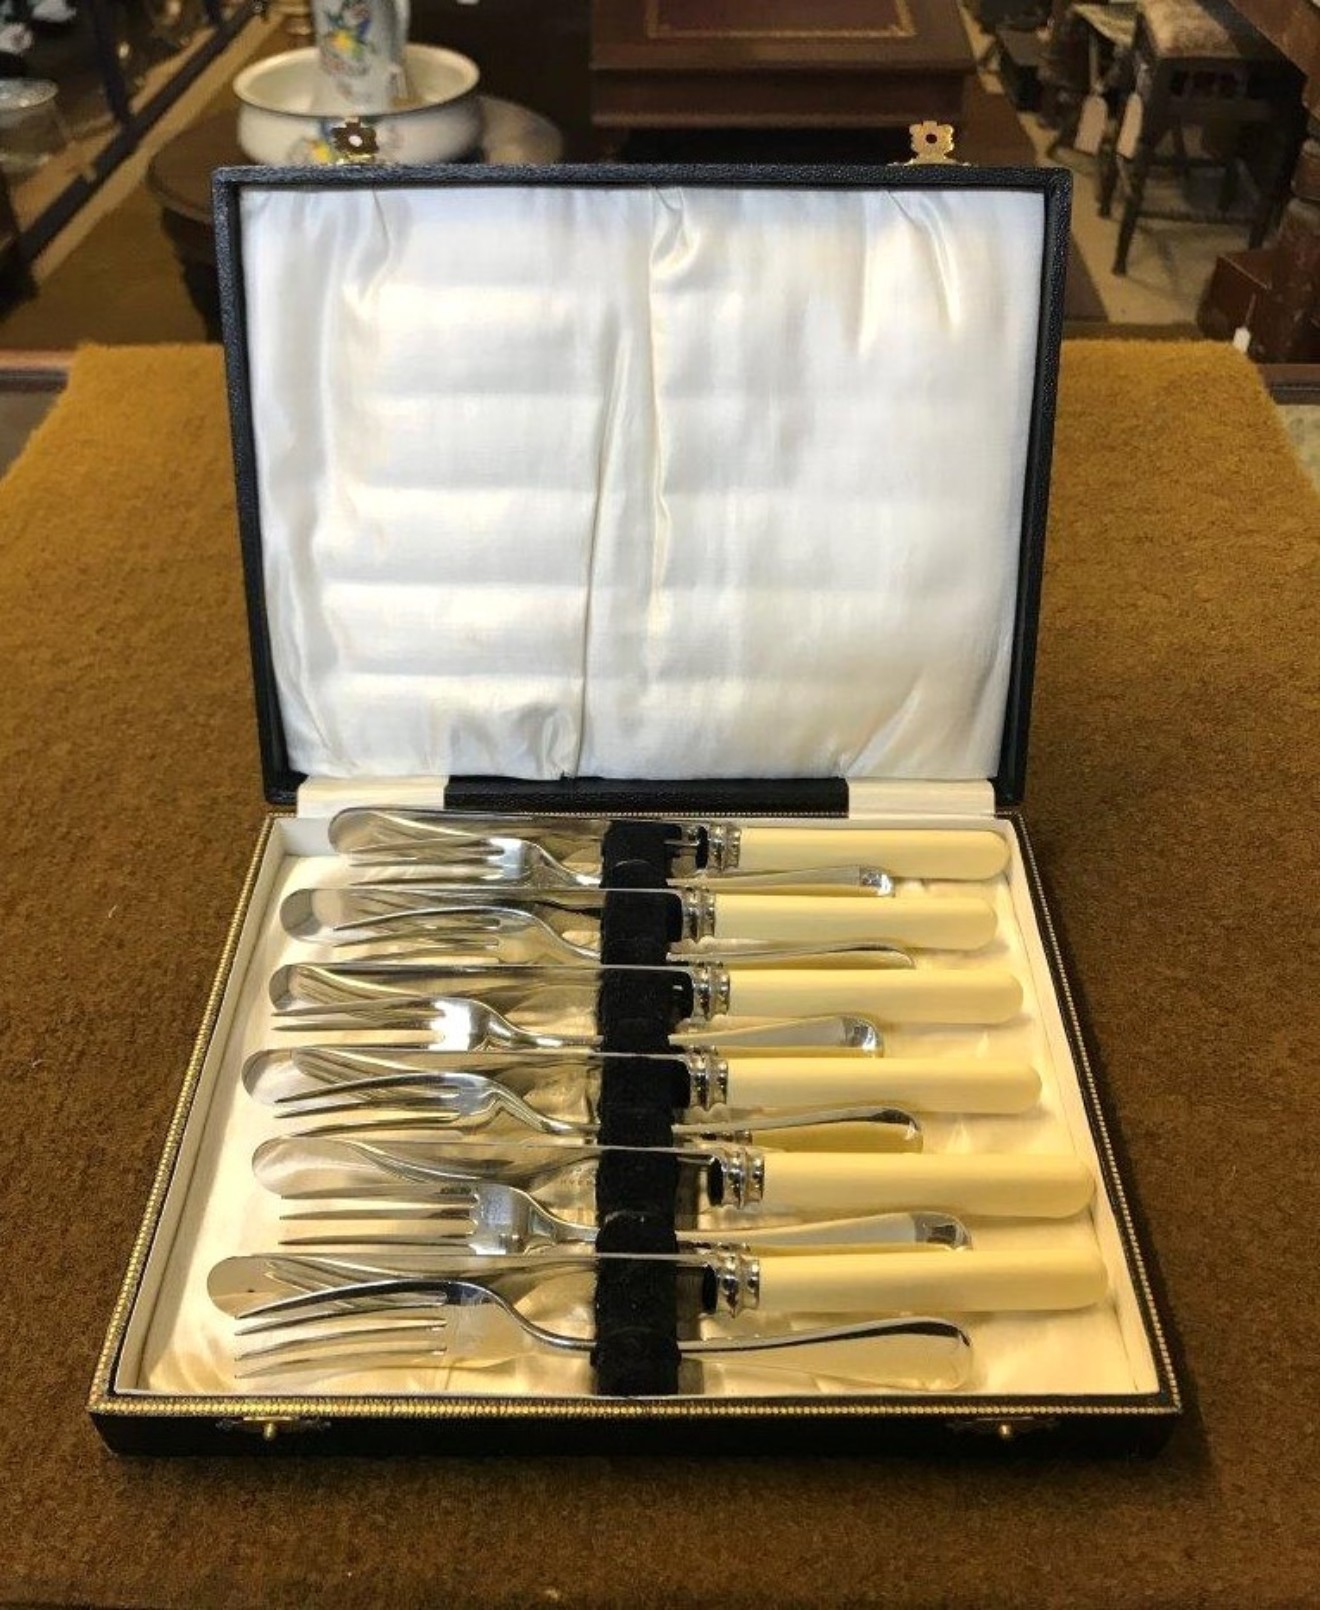 Vintage Boxed Set of 6 Fish Knives and 6 Forks with Celluloid Handles  Marked W Jolly Inverurie Firth Brearley Stainless - Bruce of Ballater